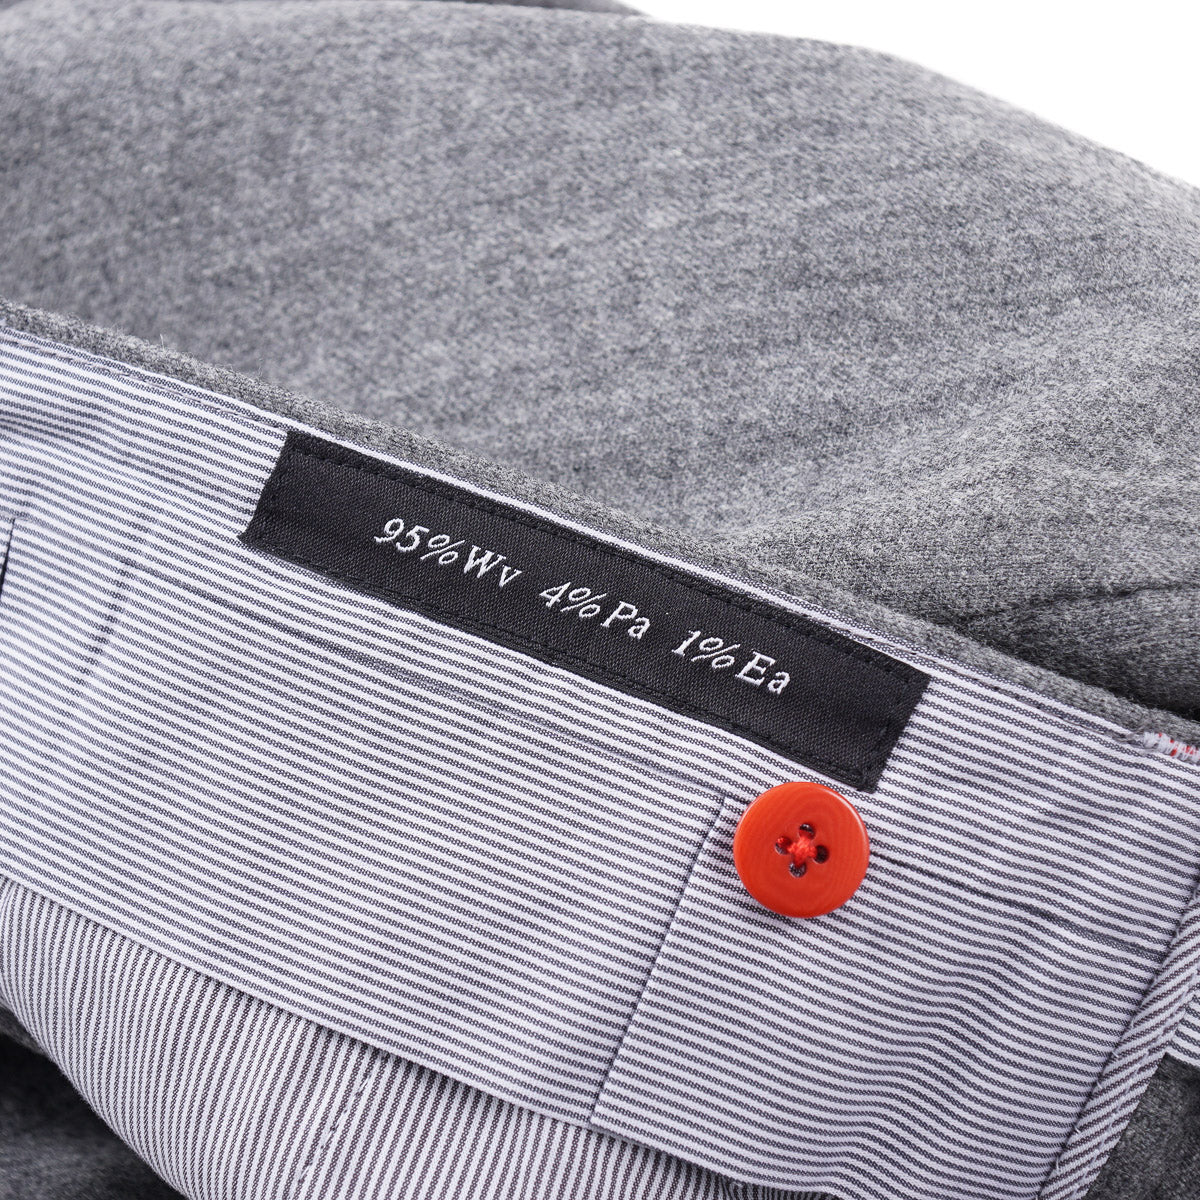 Kiton Button-Fly Flannel Wool Pants - Top Shelf Apparel